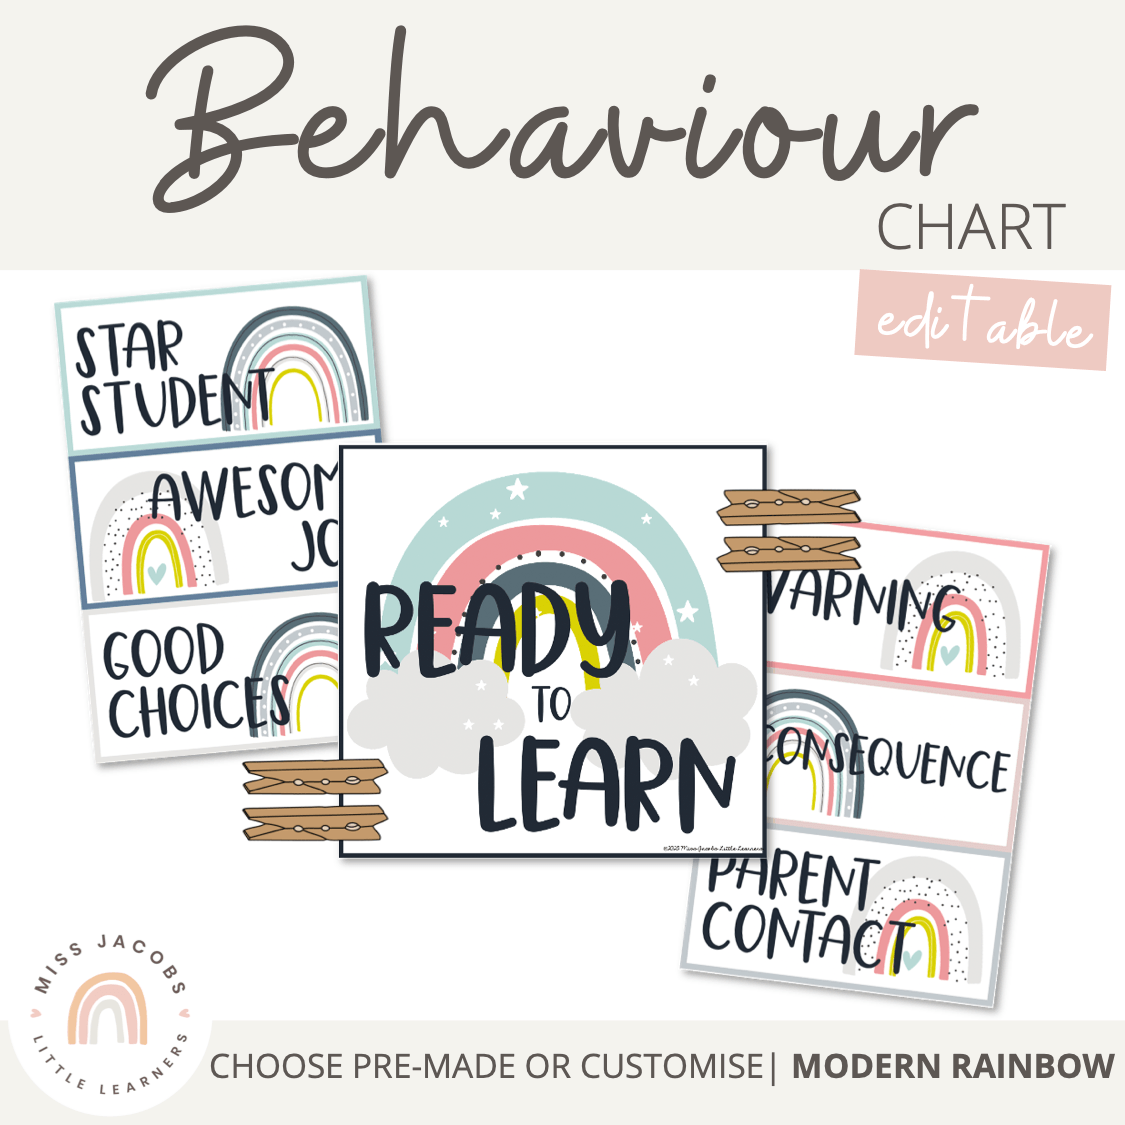 Behavior Management Flip Chart With Rainbow Markers - Primary - 1 flip  chart, 8 markers